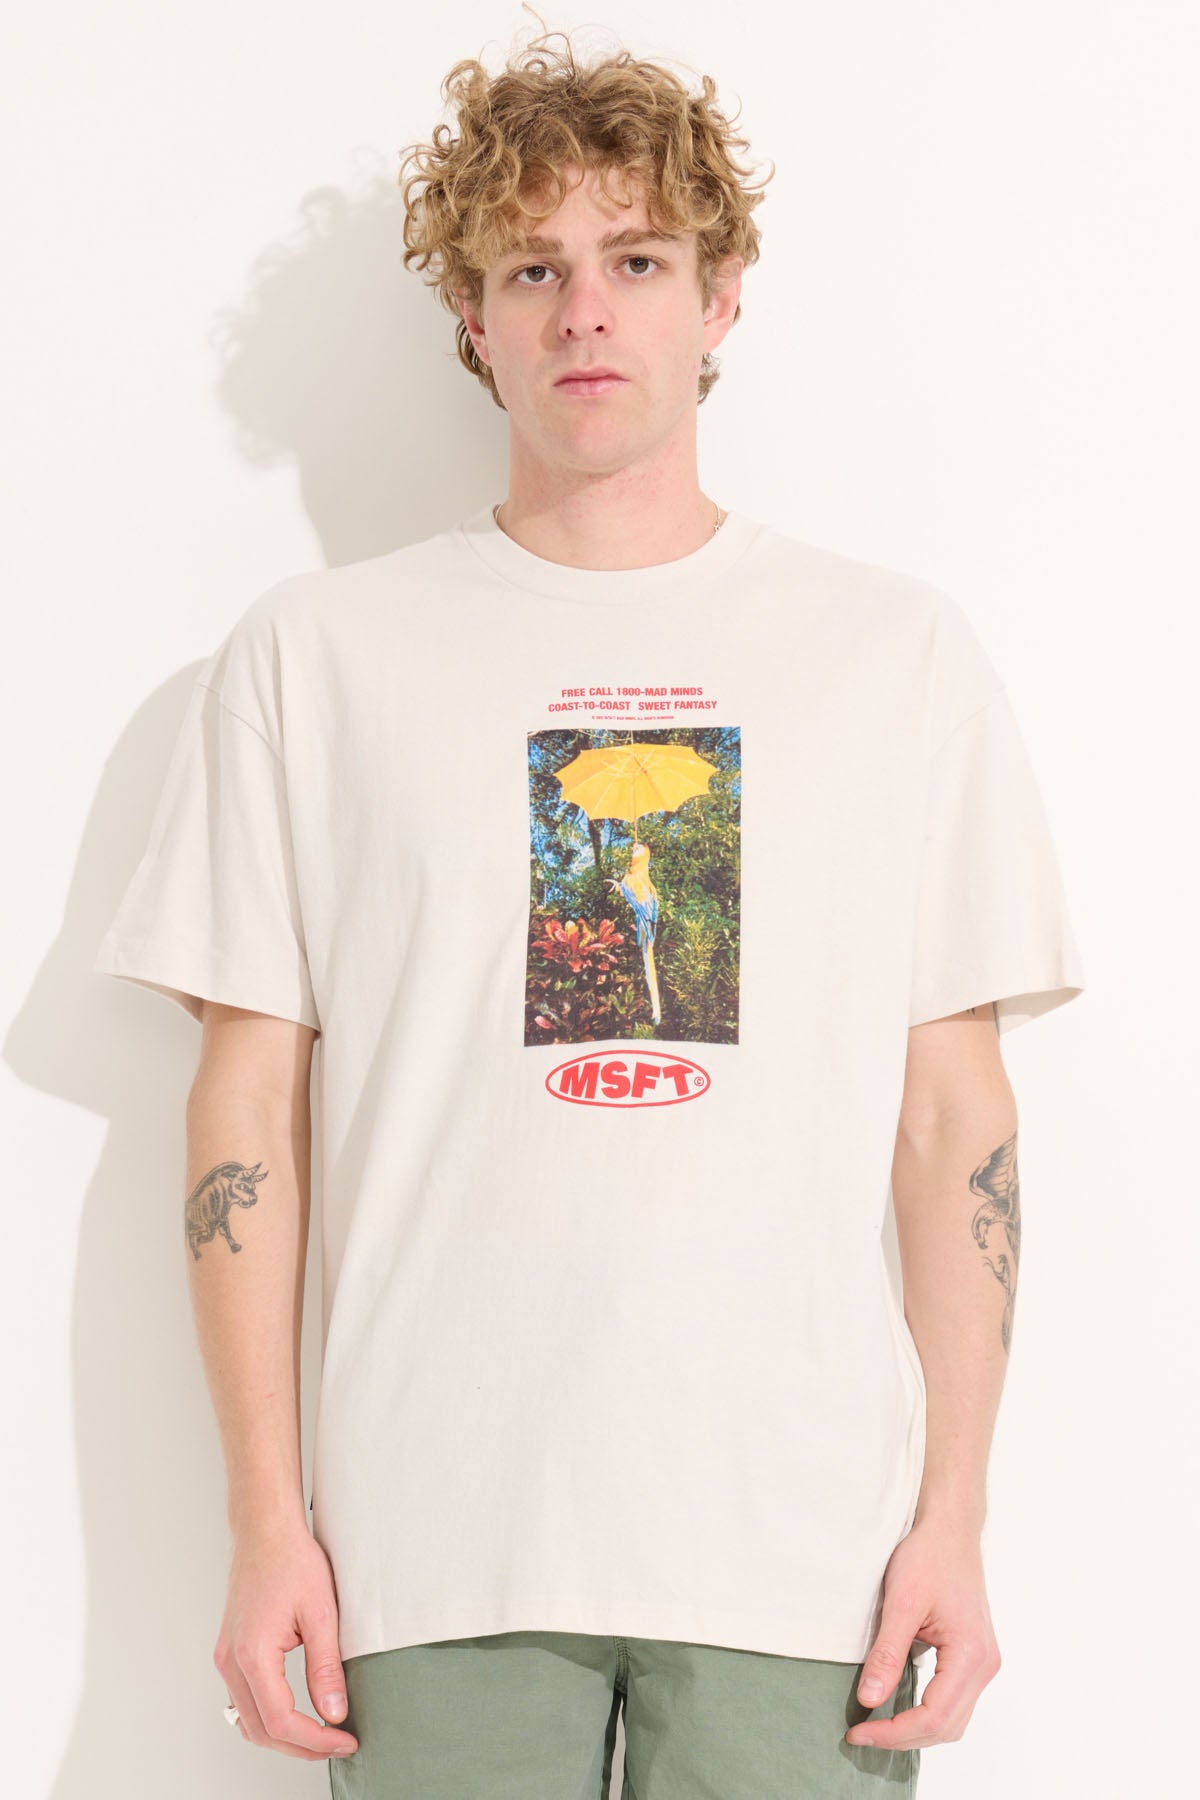 Misfit Shapes - Tall Springs 50-50 SS Tee - Thrift White